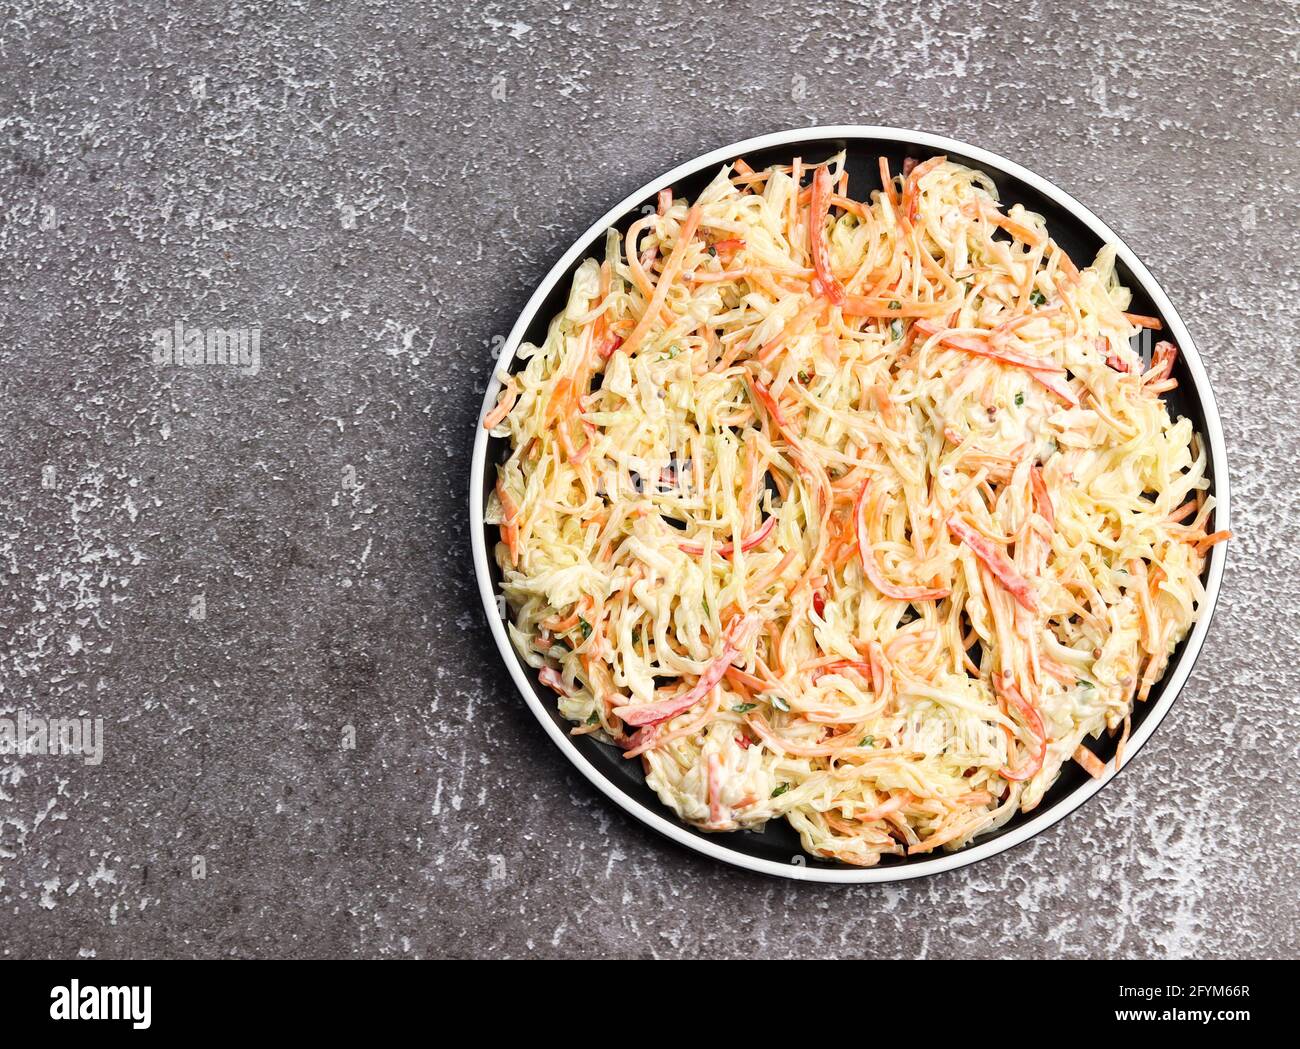 Fresh coleslaw salad on a round plate on a dark background. Top view, flat lay Stock Photo